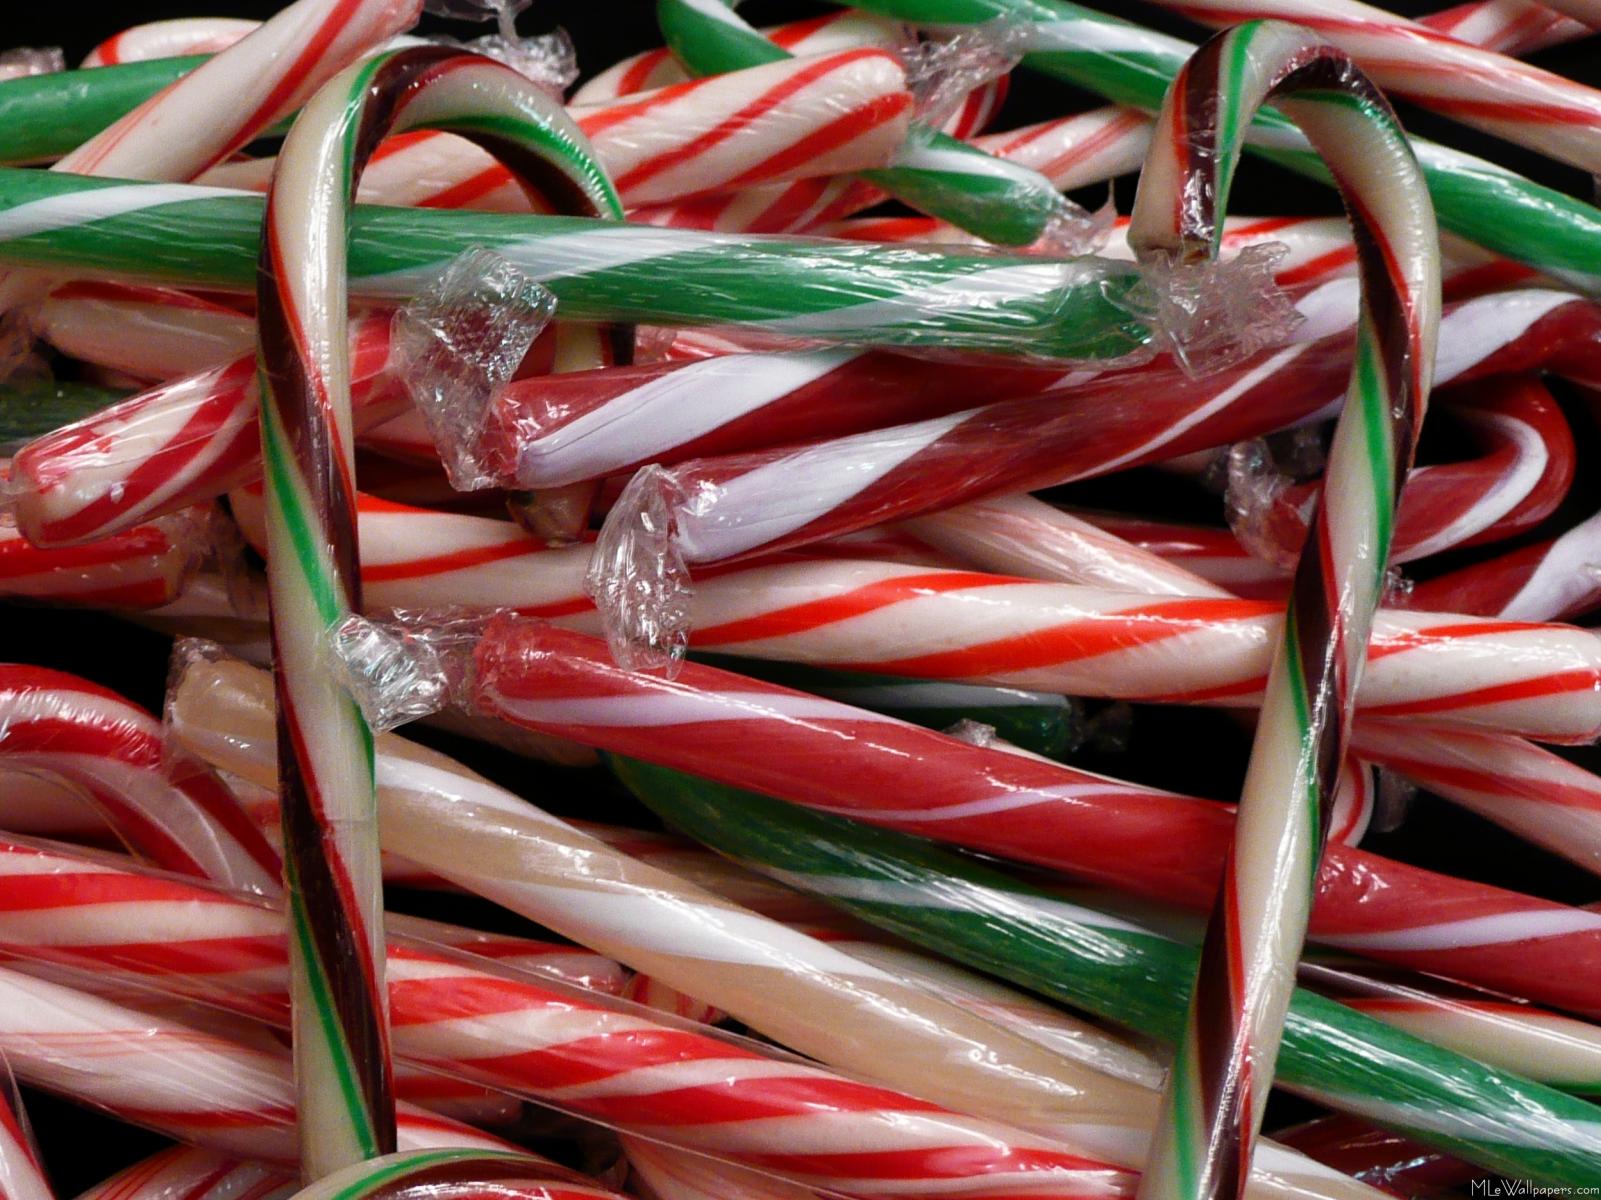 This wallpaper of candy canes features some tasty chocolate mint candy canes 